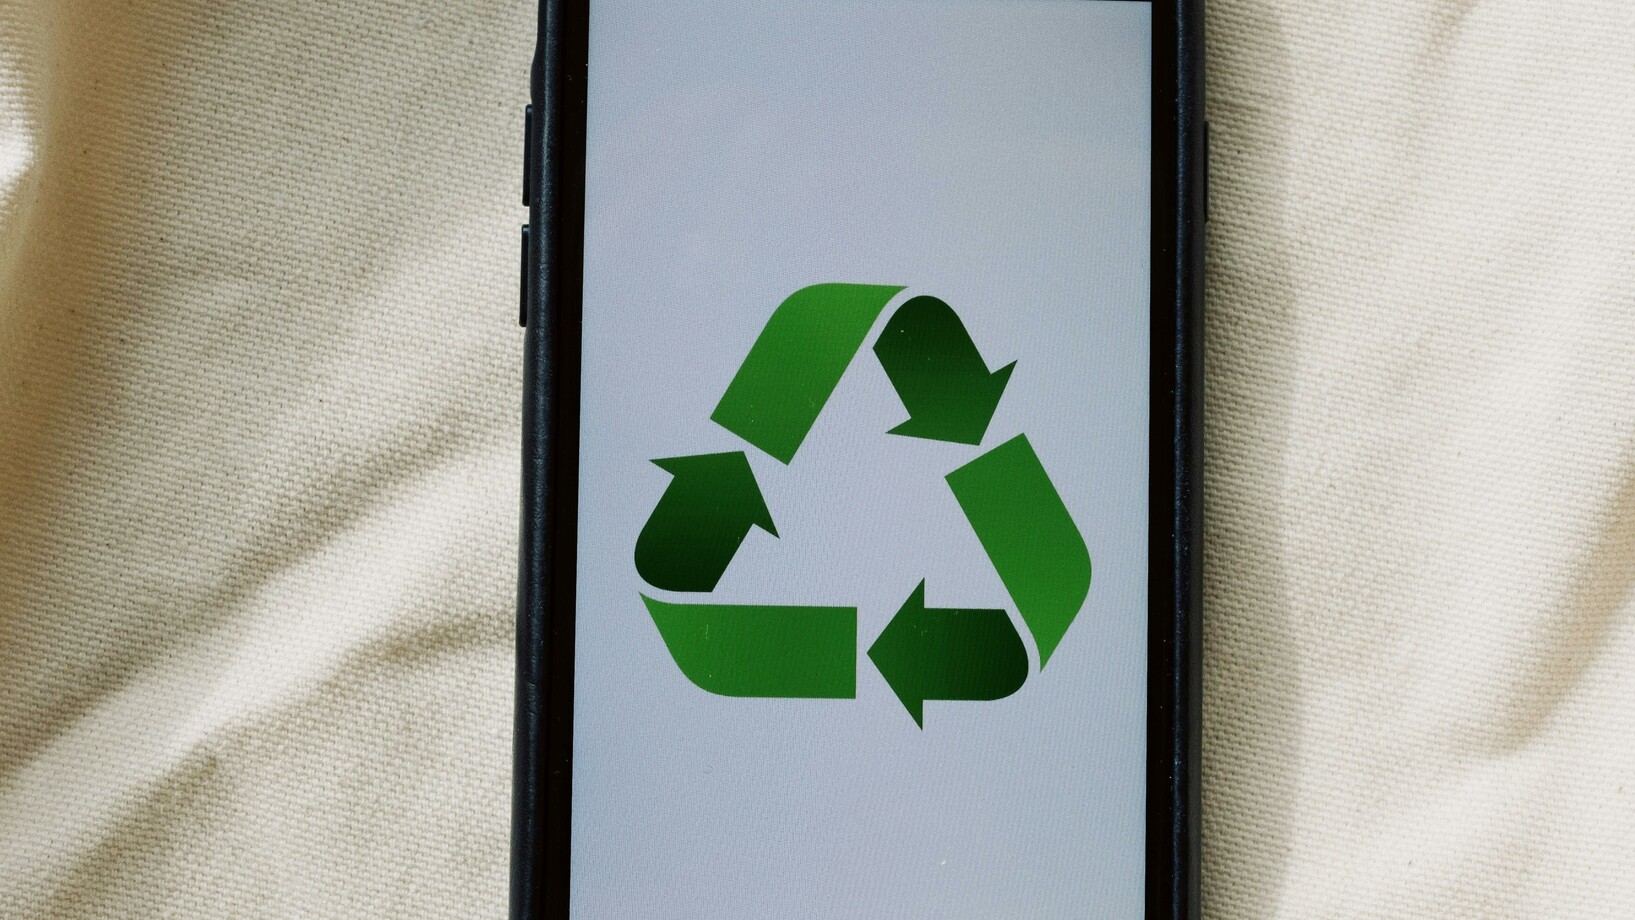 Smartphone with recycling symbol on screen placed on white textile surface